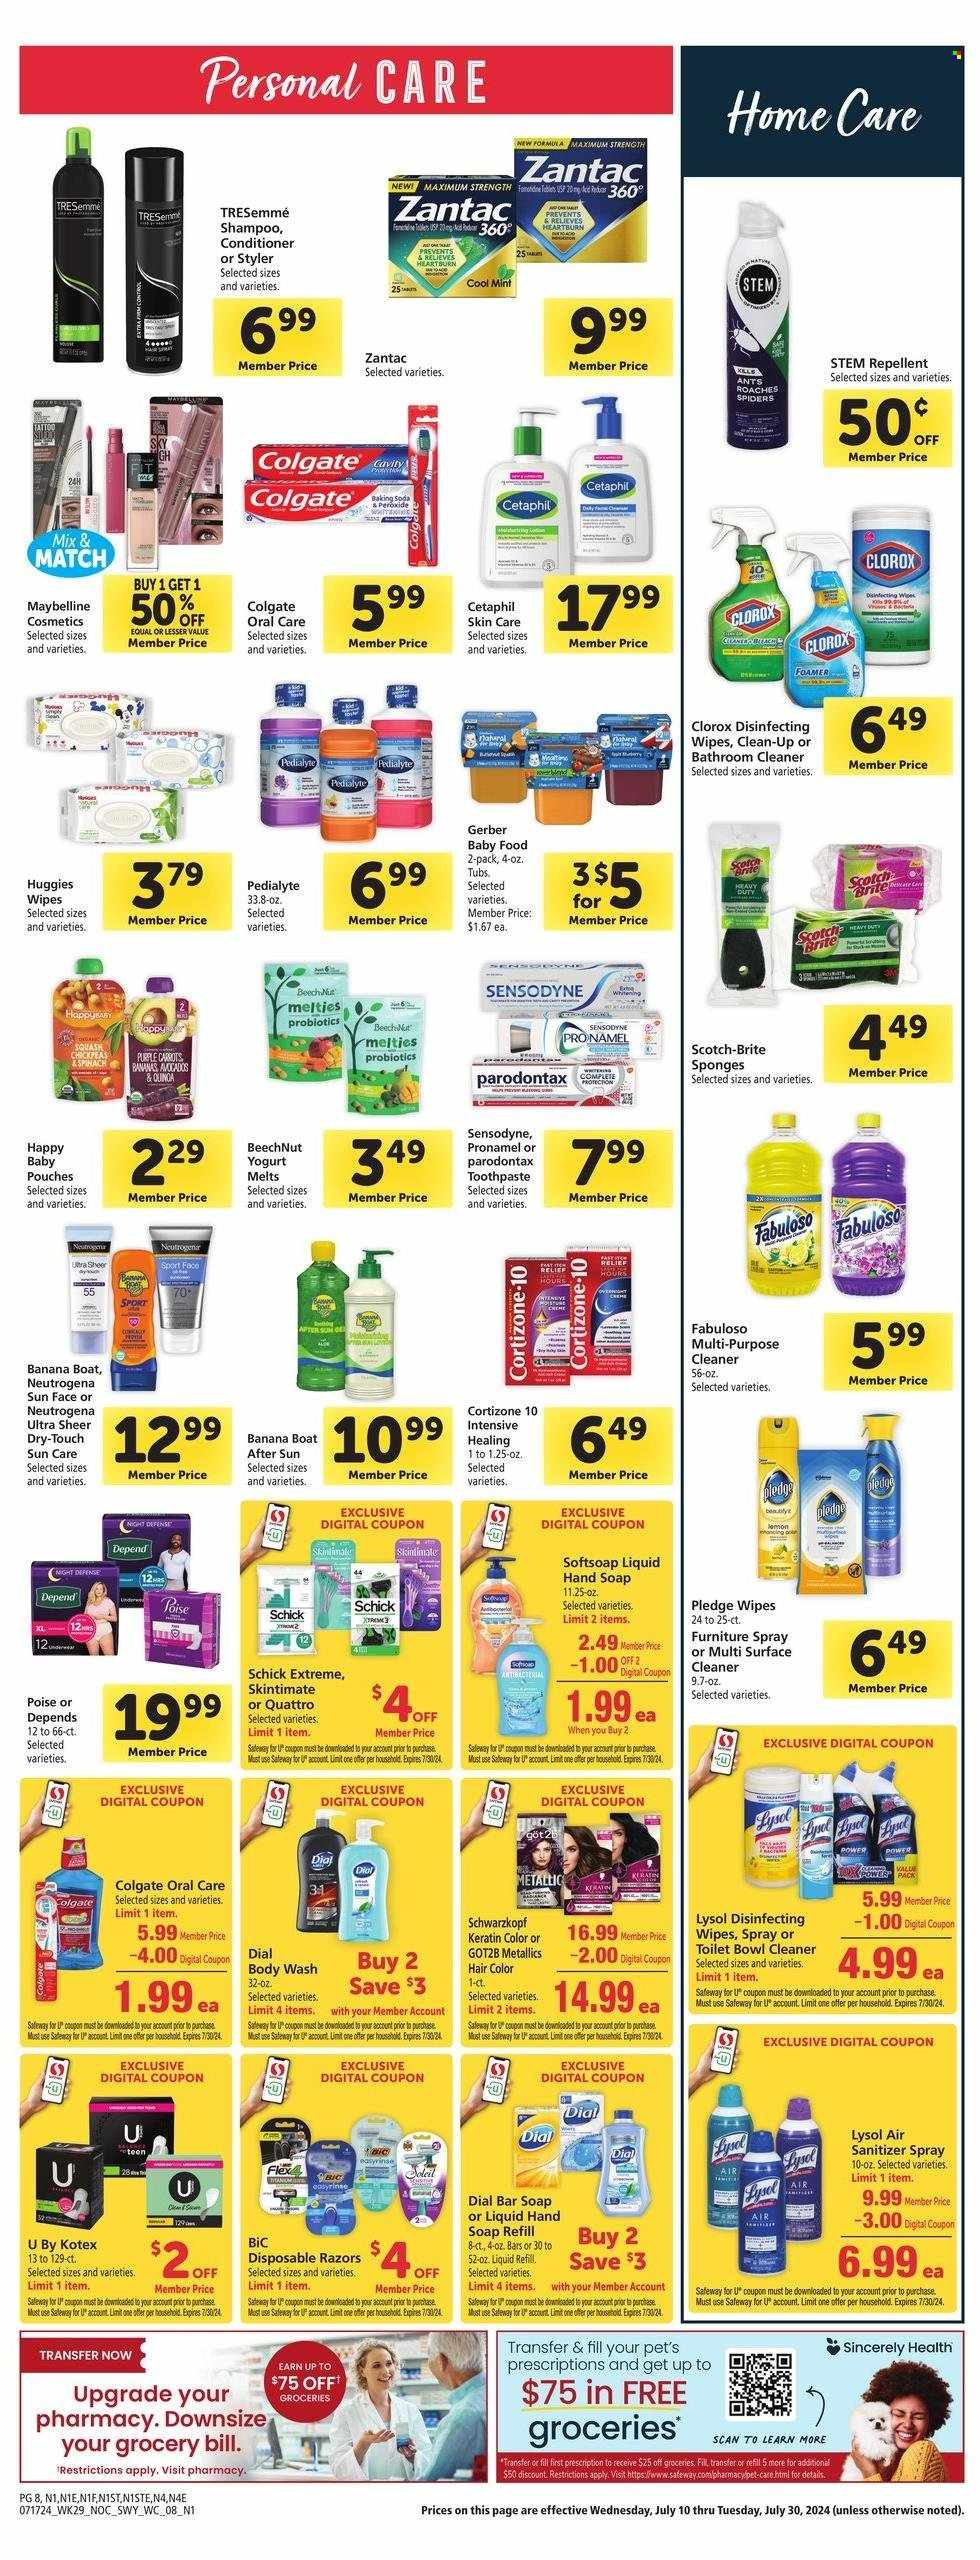 thumbnail - Vons Flyer - 07/17/2024 - 07/23/2024 - Sales products - carrots, avocado, yoghurt, Gerber, bicarbonate of soda, quinoa, chickpeas, Pedialyte, baby snack, cleansing wipes, wipes, Huggies, baby wipes, surface cleaner, cleaner, all purpose cleaner, toilet cleaner, Lysol, Clorox, Pledge, Fabuloso, bathroom cleaner, body wash, shampoo, Softsoap, hand soap, Schwarzkopf, soap bar, Dial, soap, Colgate, toothpaste, Sensodyne, Parodontax, Kotex, Poise, Neutrogena, sponge, sun care, Cetaphil, skin care product, conditioner, TRESemmé, hair color, BIC, Schick, disposable razor, air freshener, Zantac, probiotics, dietary supplement, Cortizone. Page 8.